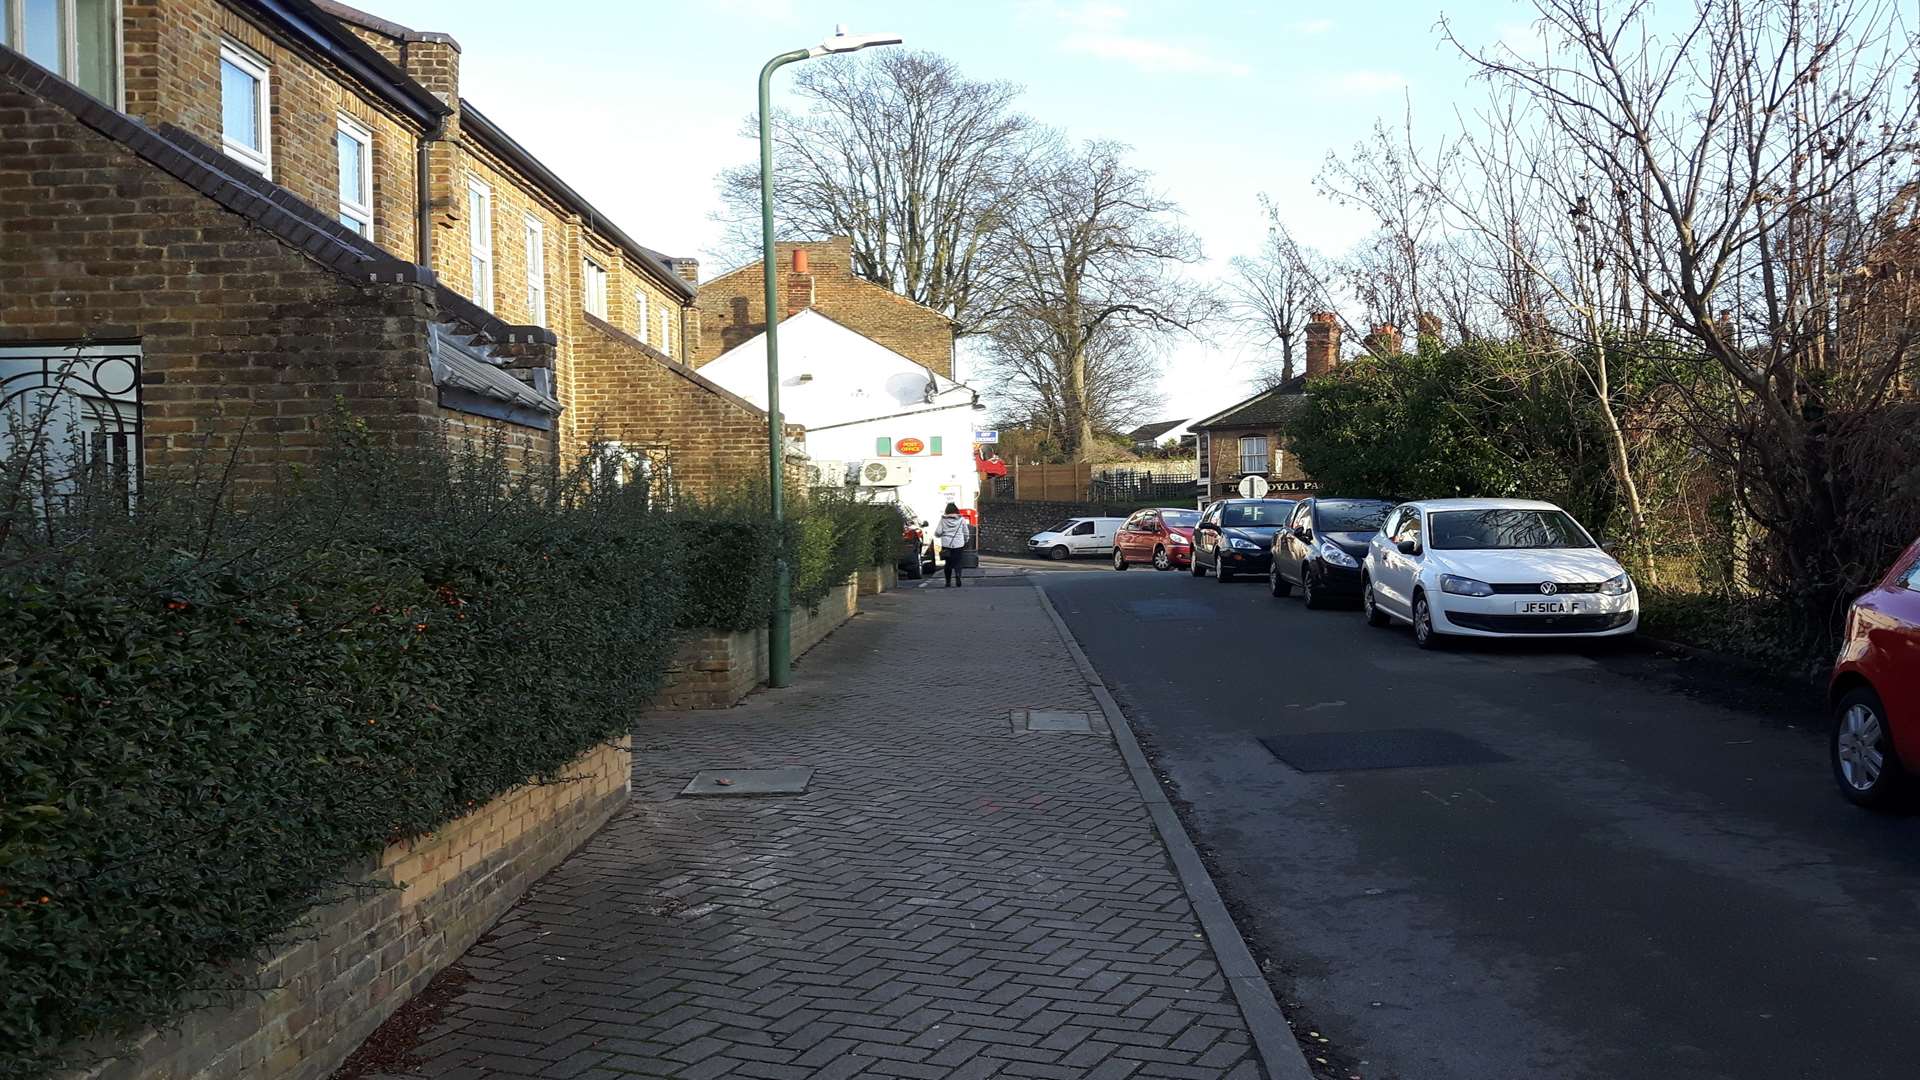 Looking along Church Street towards the Royal Paper Mill pub on Tovil Hill